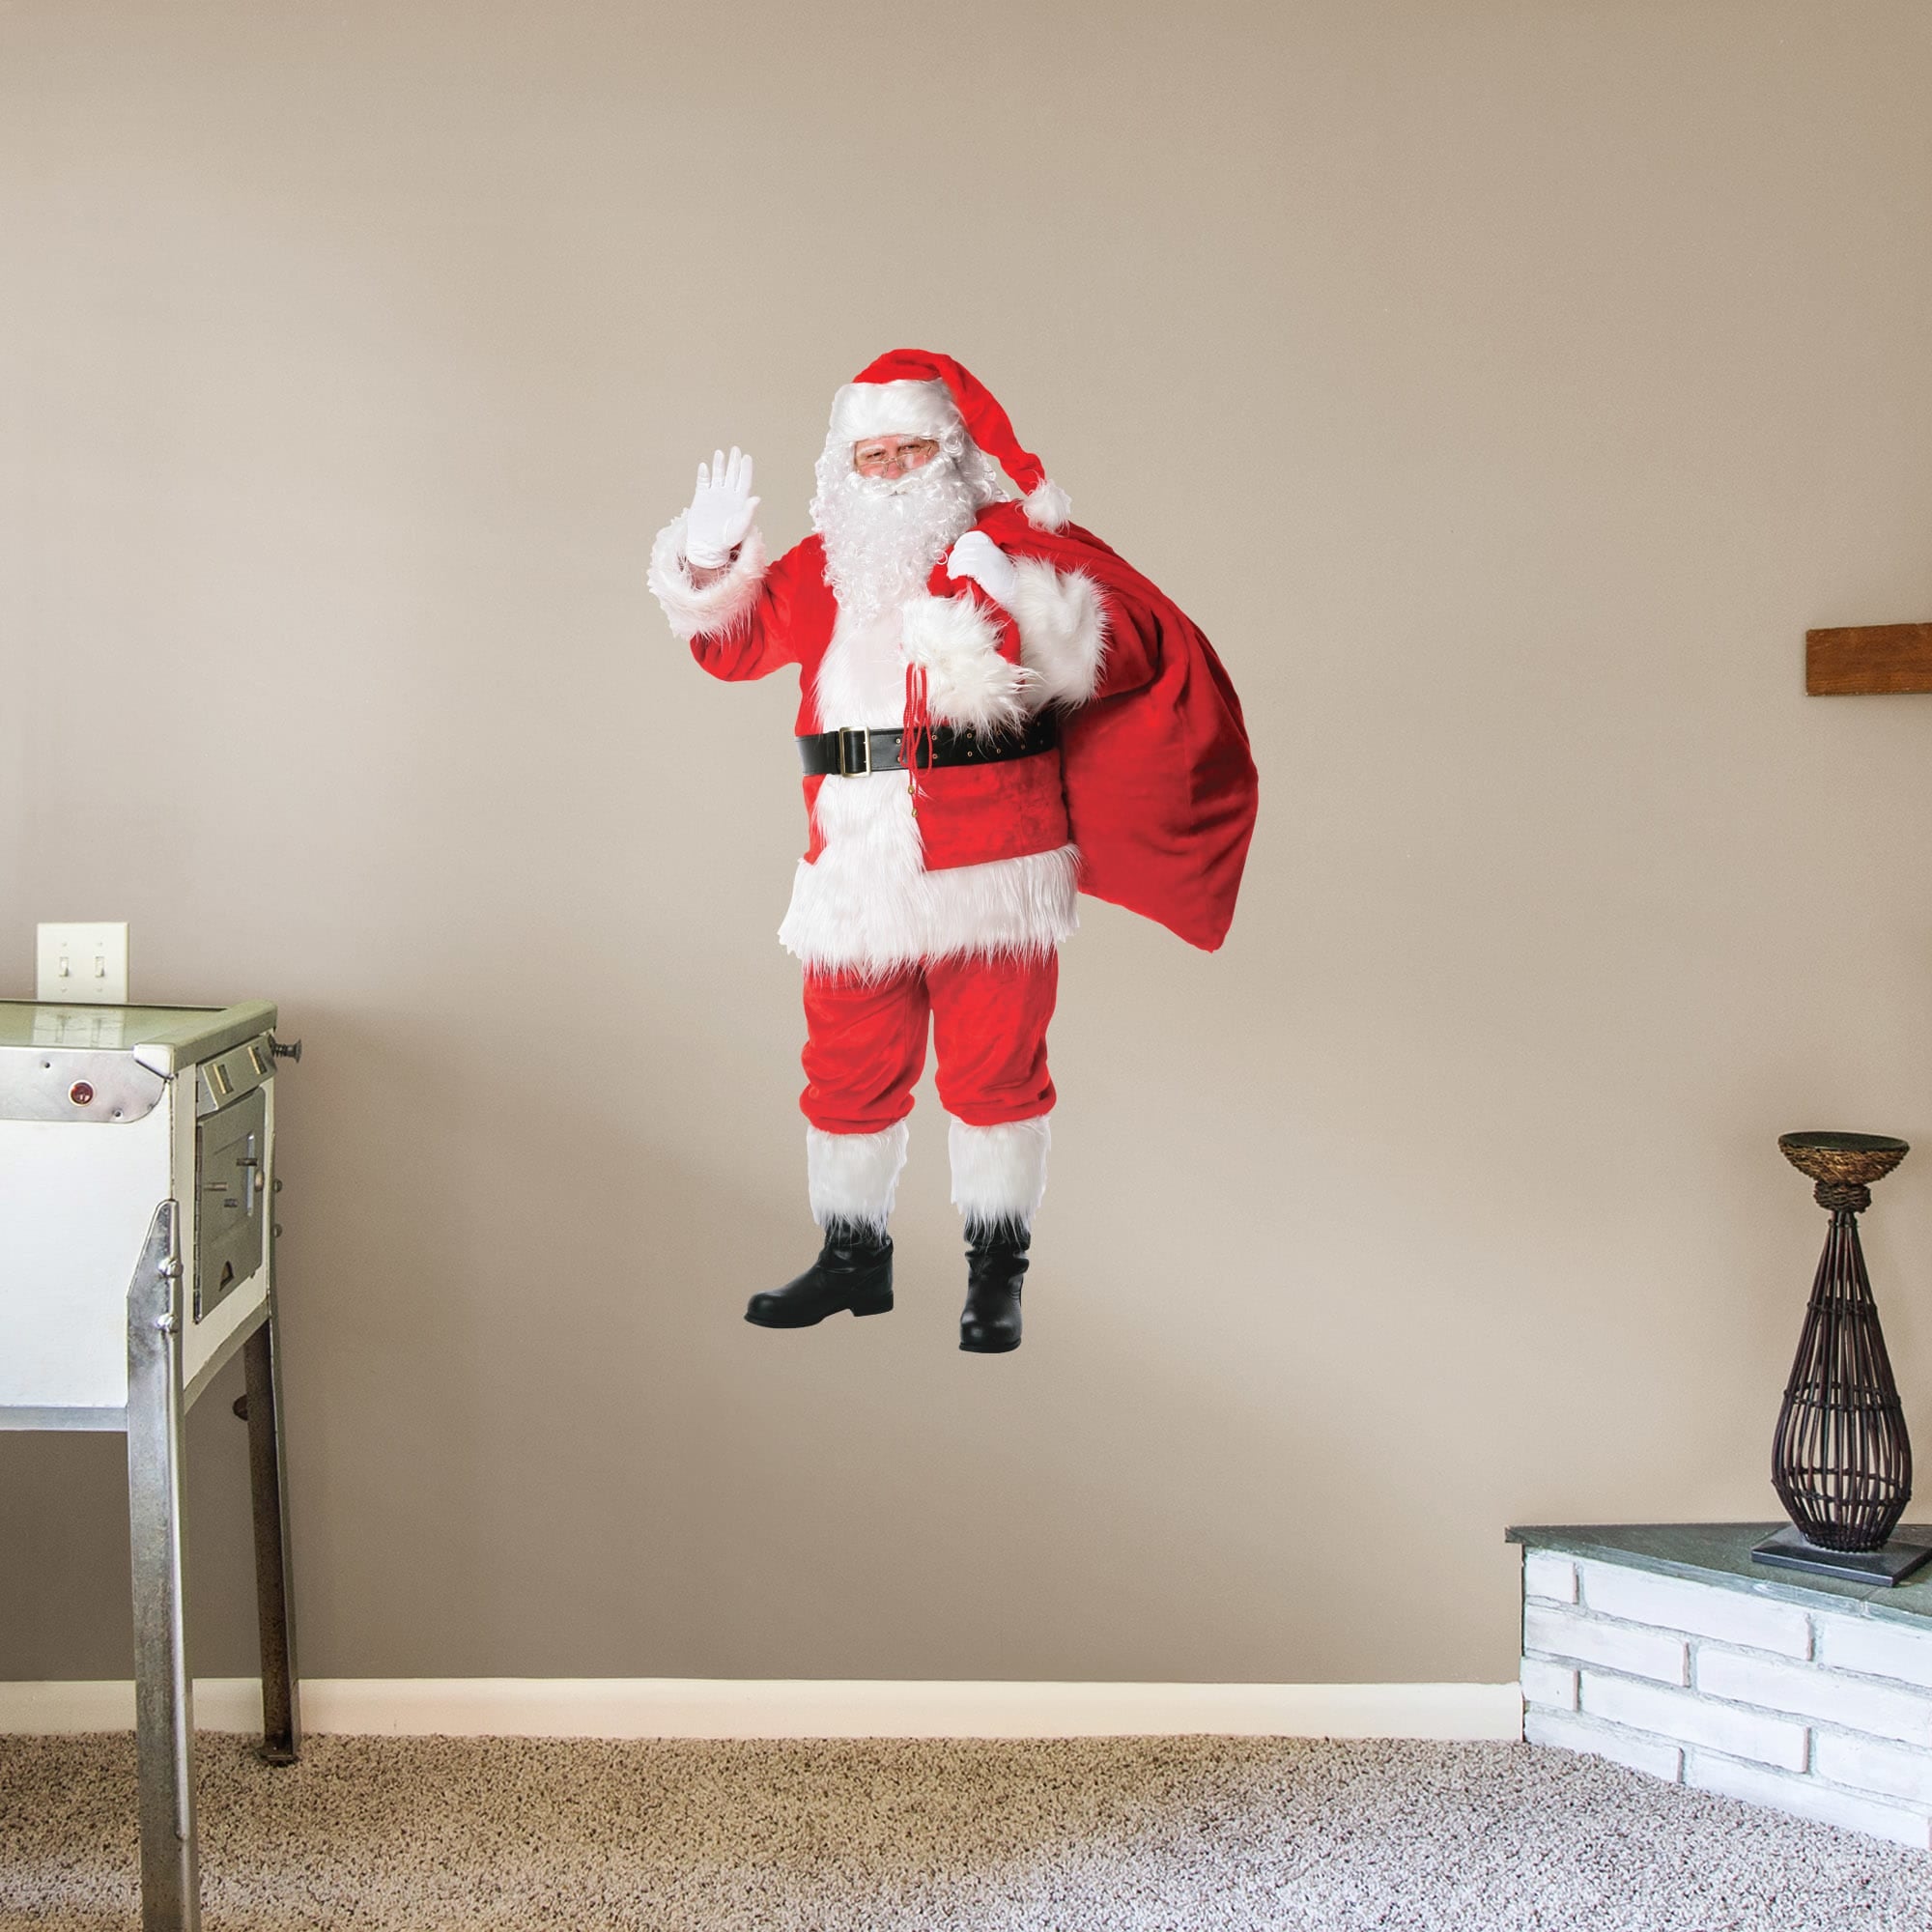 Santa Claus - Removable Wall Decal Giant Character + 2 Licensed Decals (31"W x 51"H) by Fathead | Vinyl